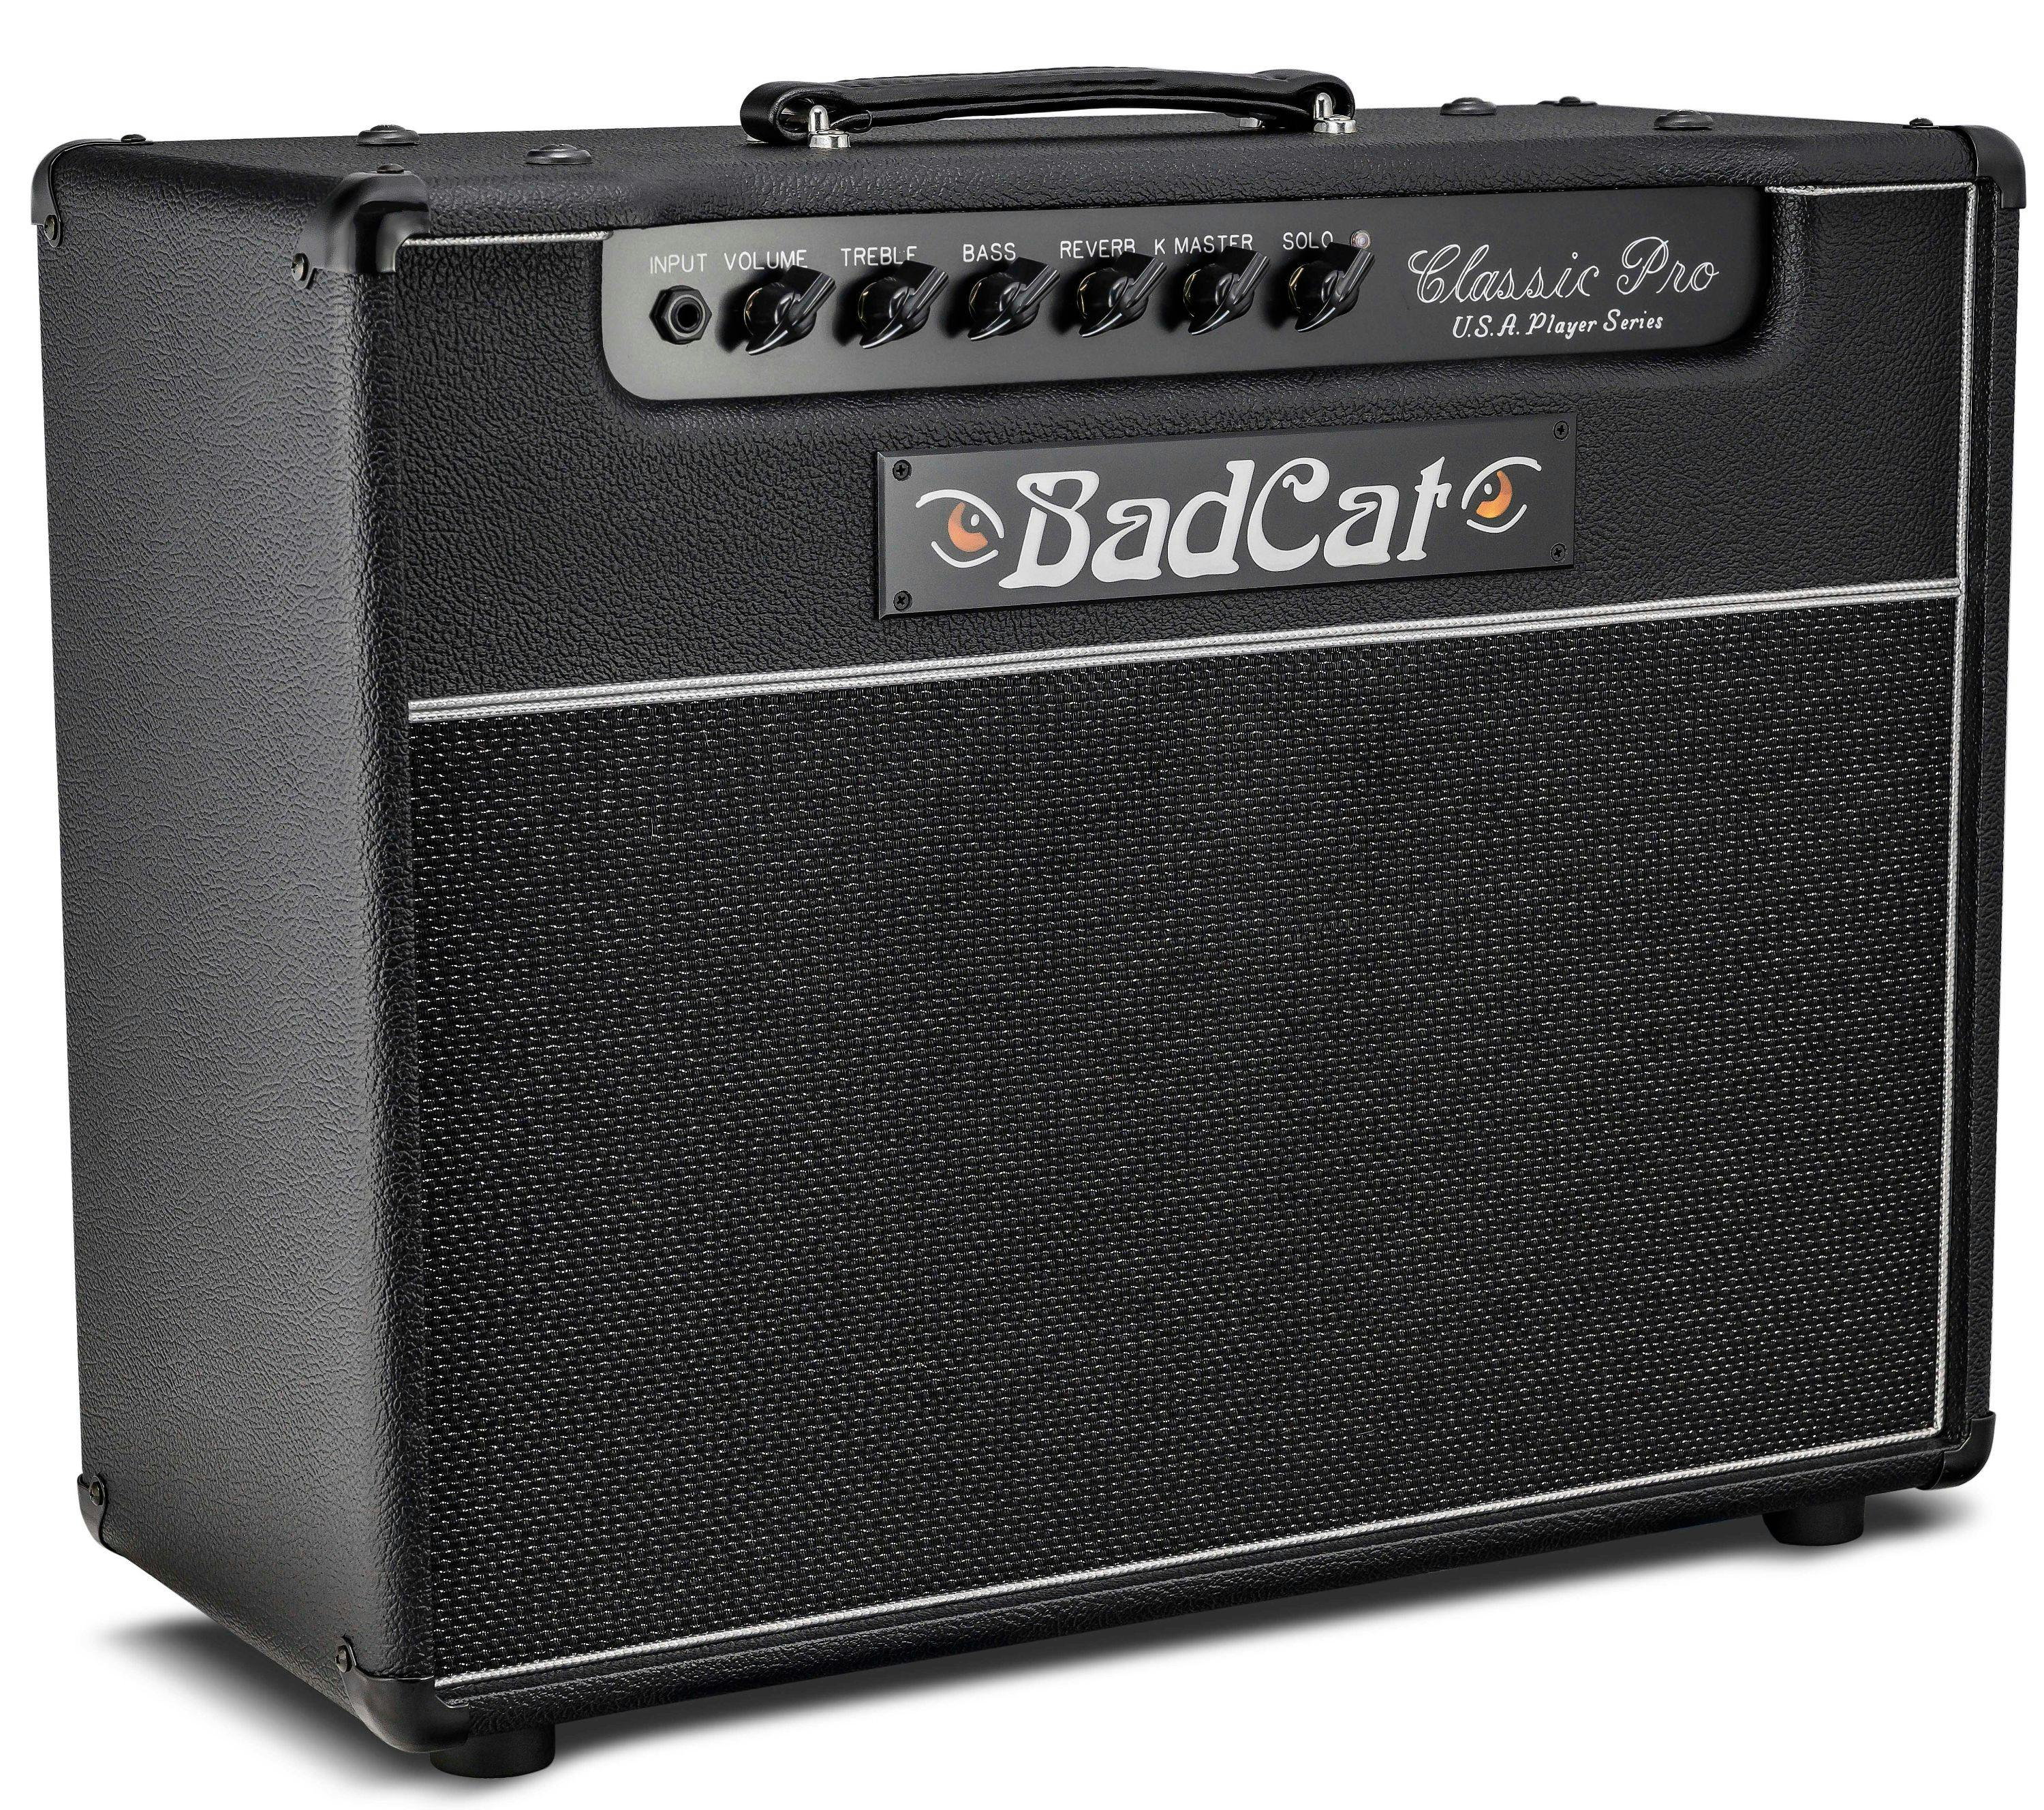 Bad Cat Classic Pro 20 Reverb Usa Player Series 20w 1x12 Valve Guitar Amp Combo Andertons Music Co